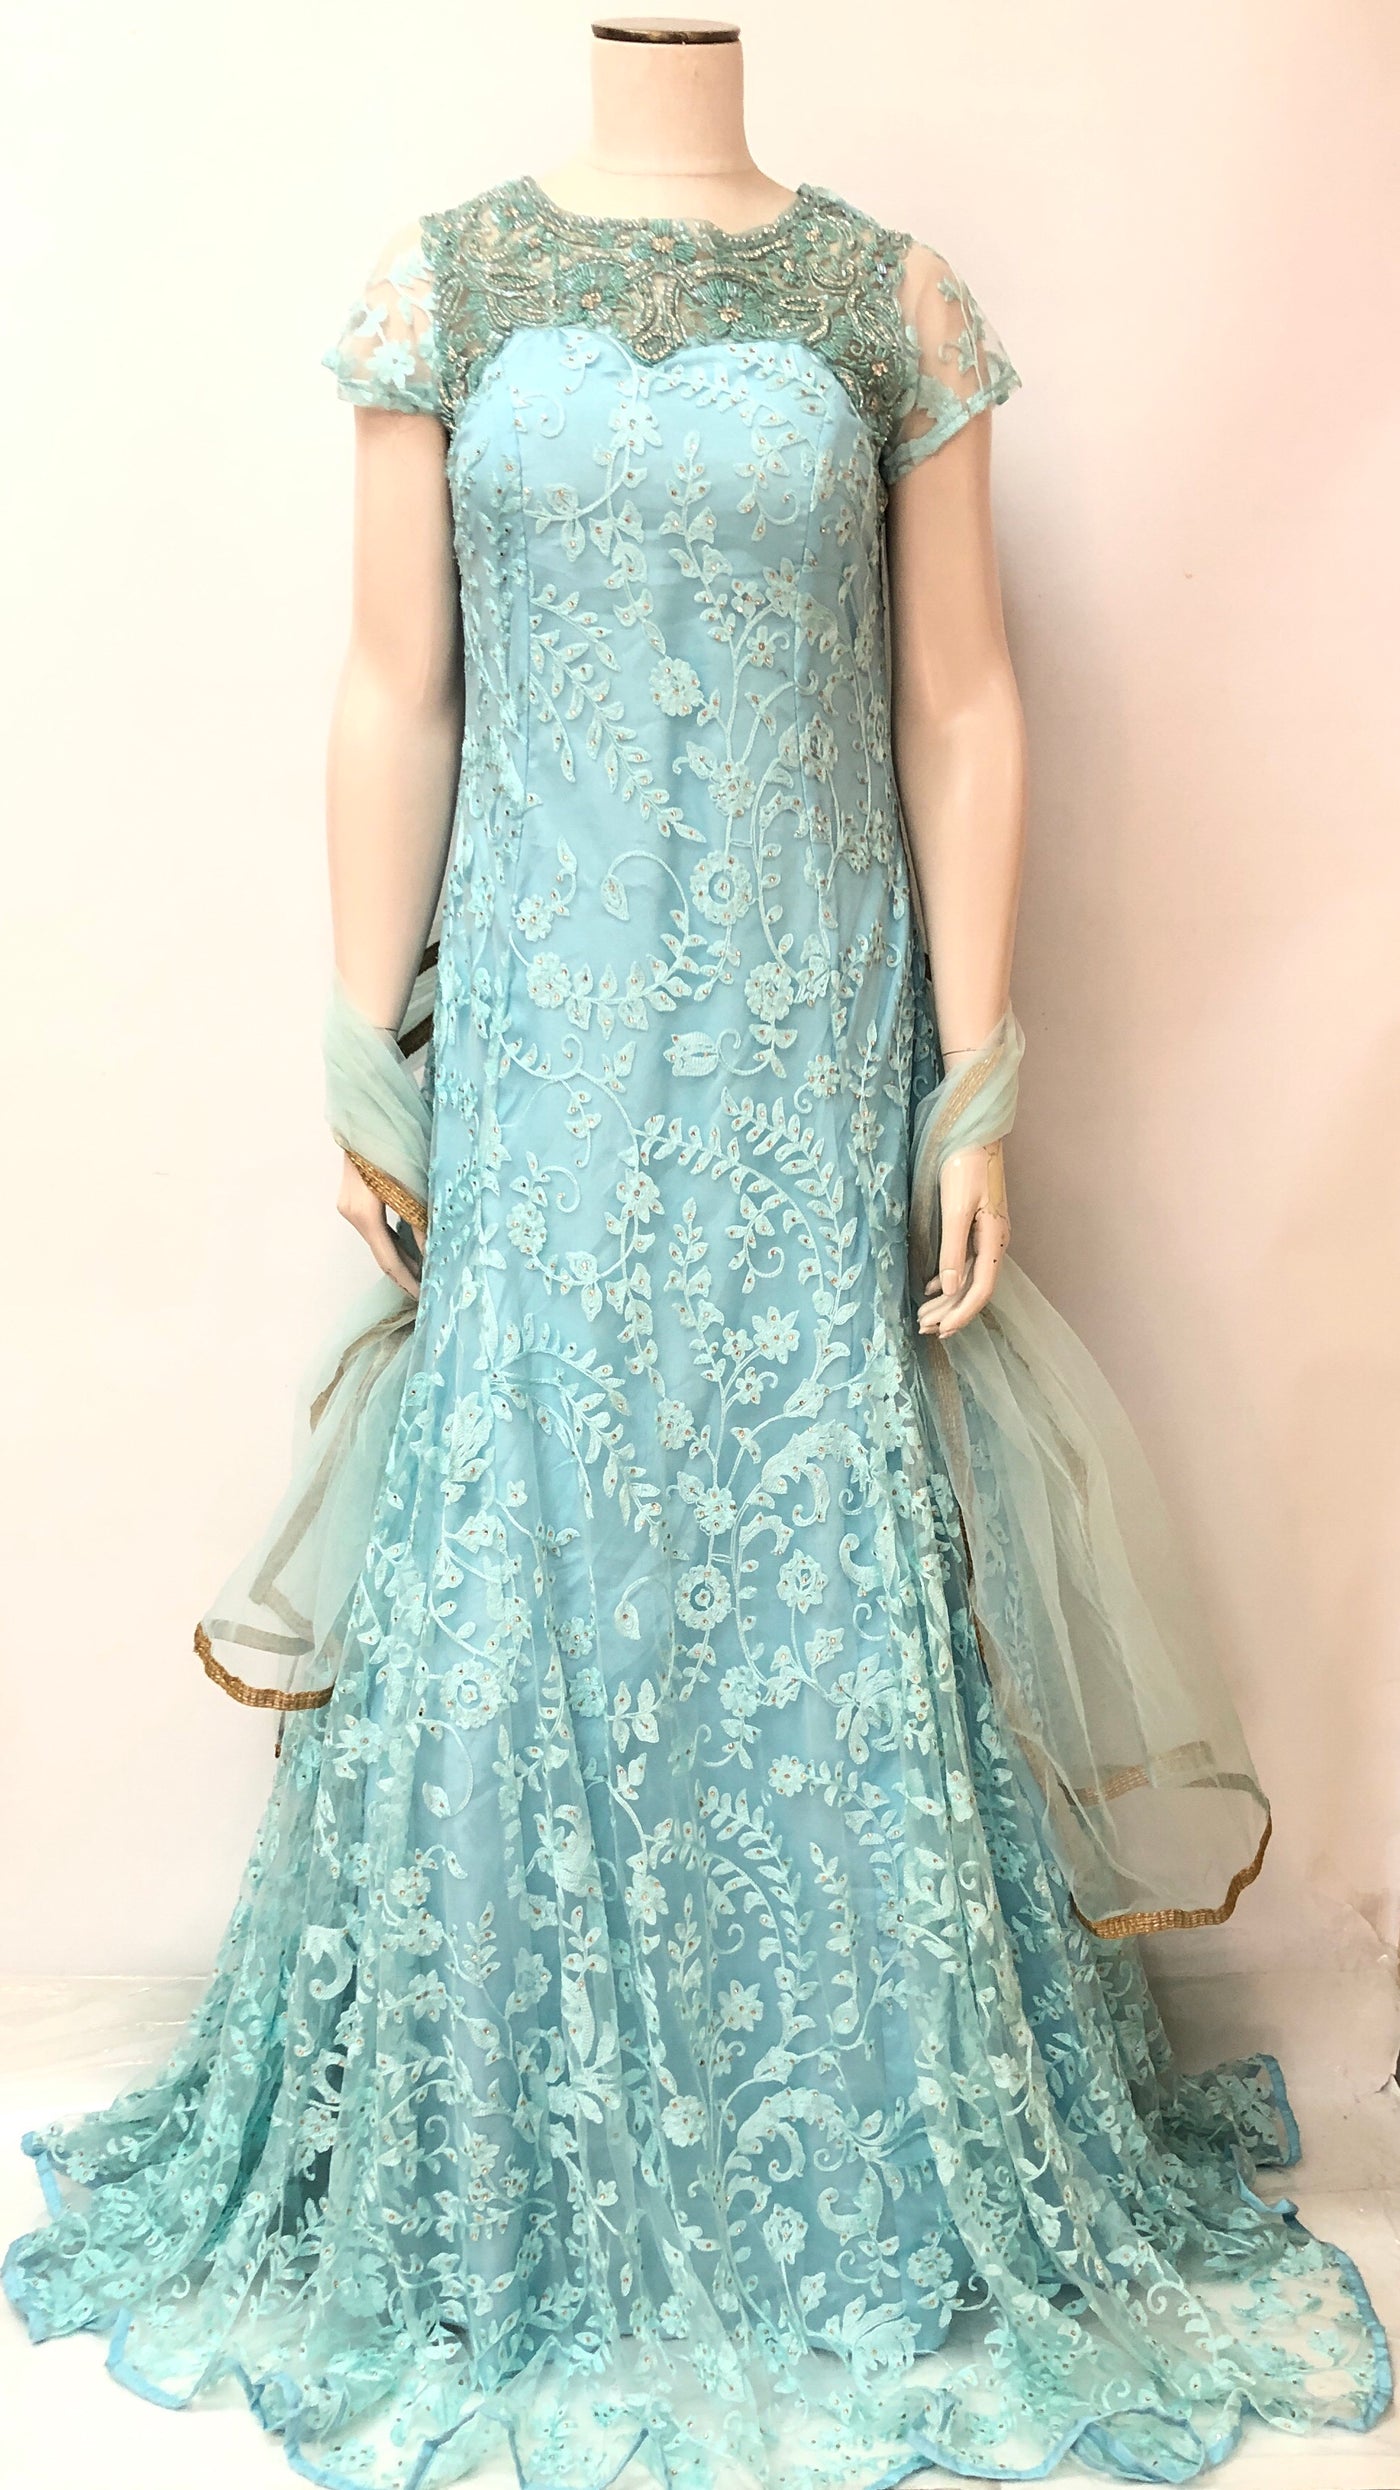 Tridha Choudhary in kalki teal green strapless fish cut gown with long net  cape KALKI Fashion India